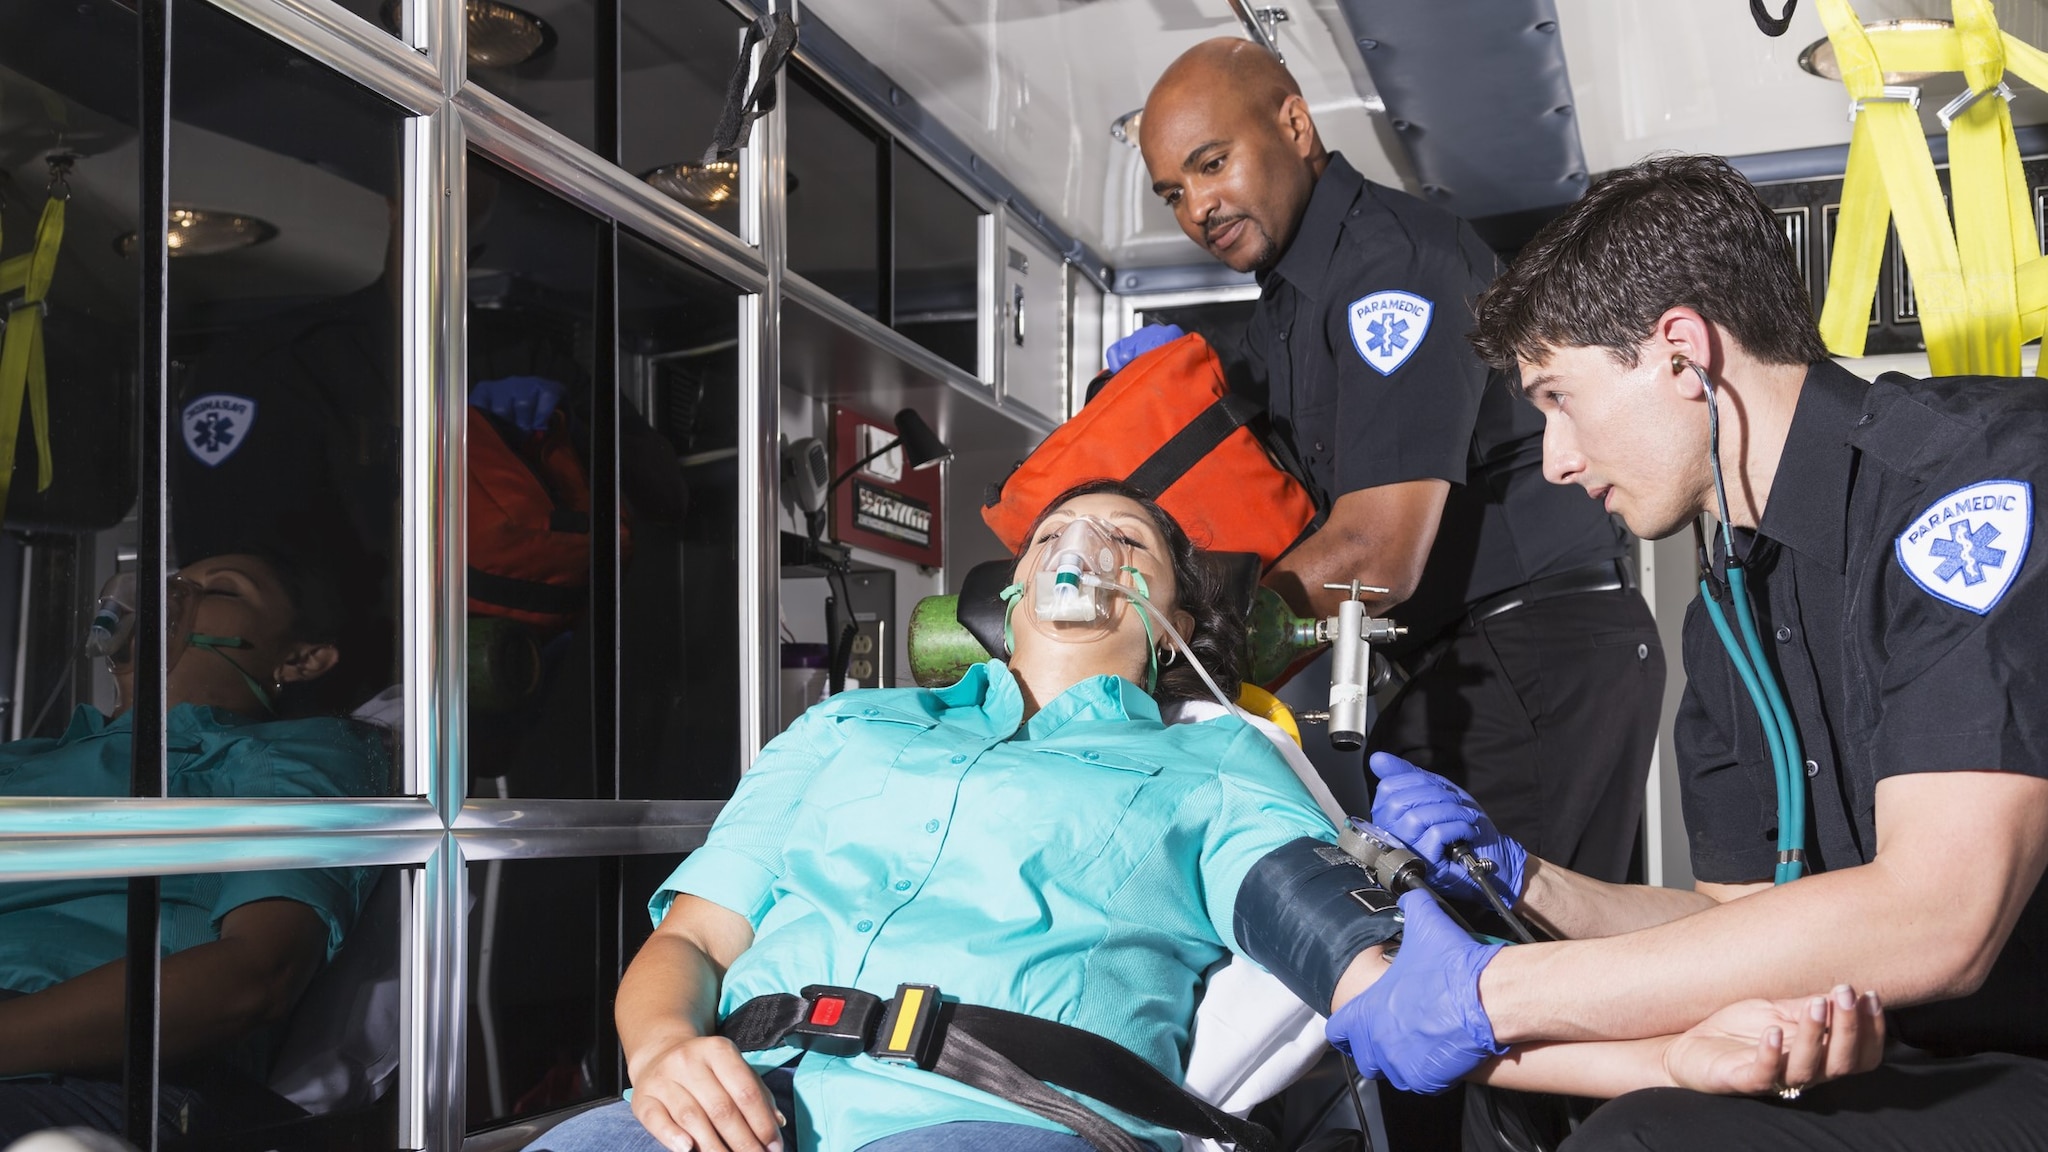 Two EMS clinicians help a patient in an ambulance. Photo by Getty/482584125